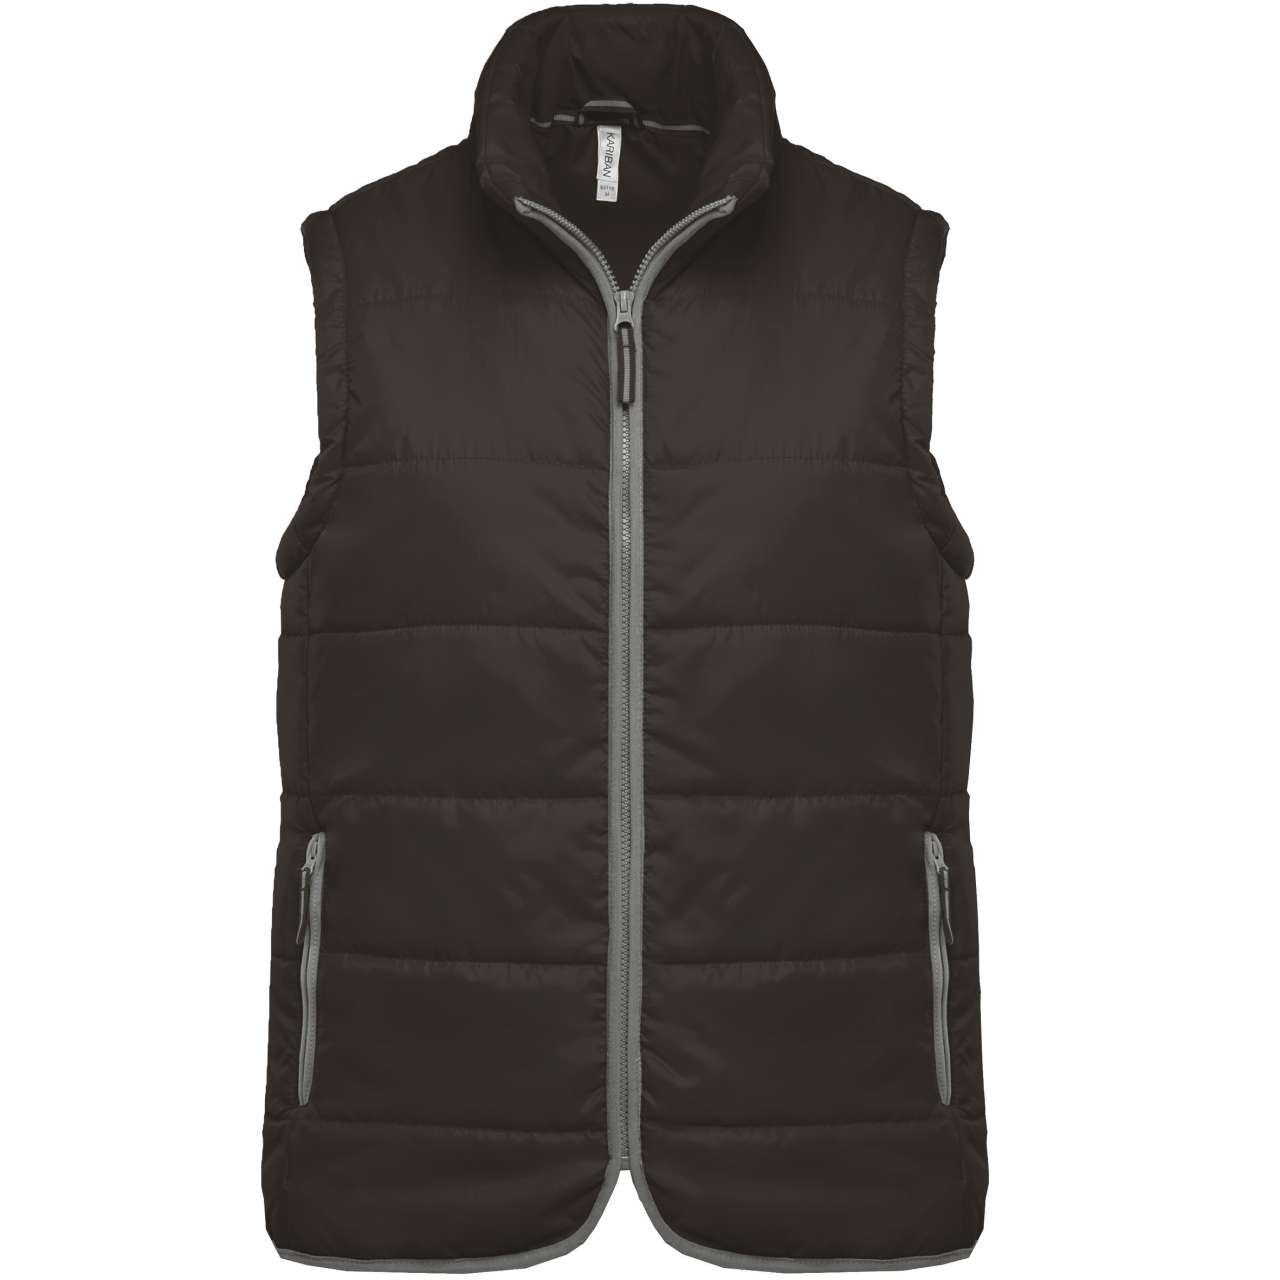 QUILTED BODYWARMER s logom firme 